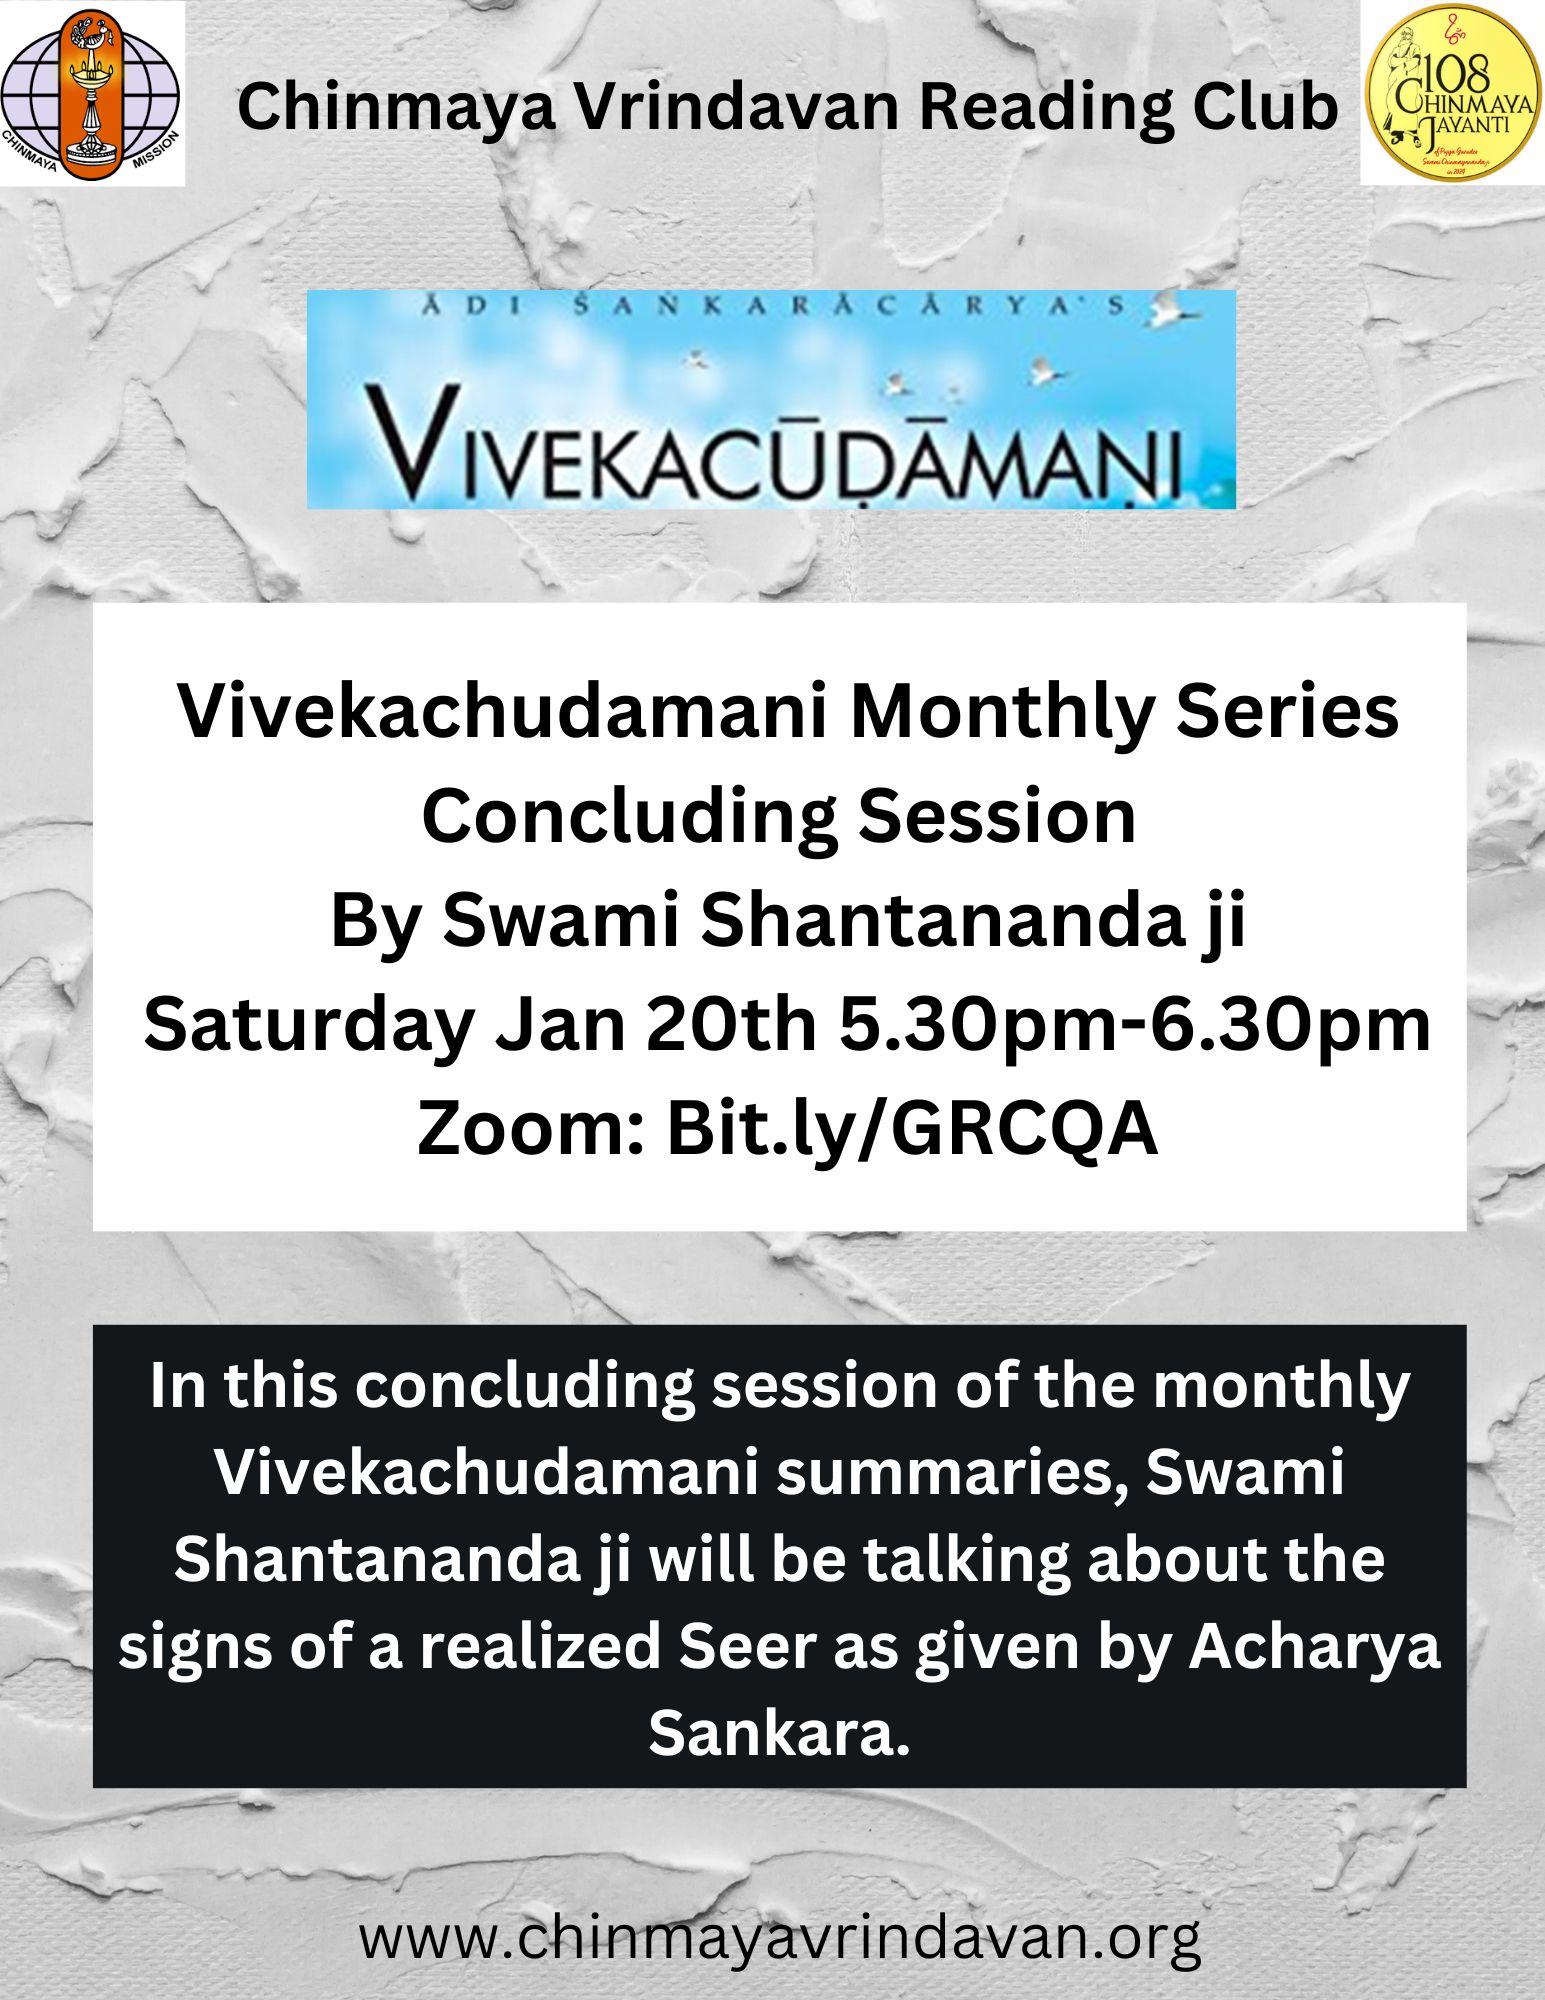 In this session Swami ji will cover the Technique of Meditation as given by Acharya Sankara in the Vivekachudamani